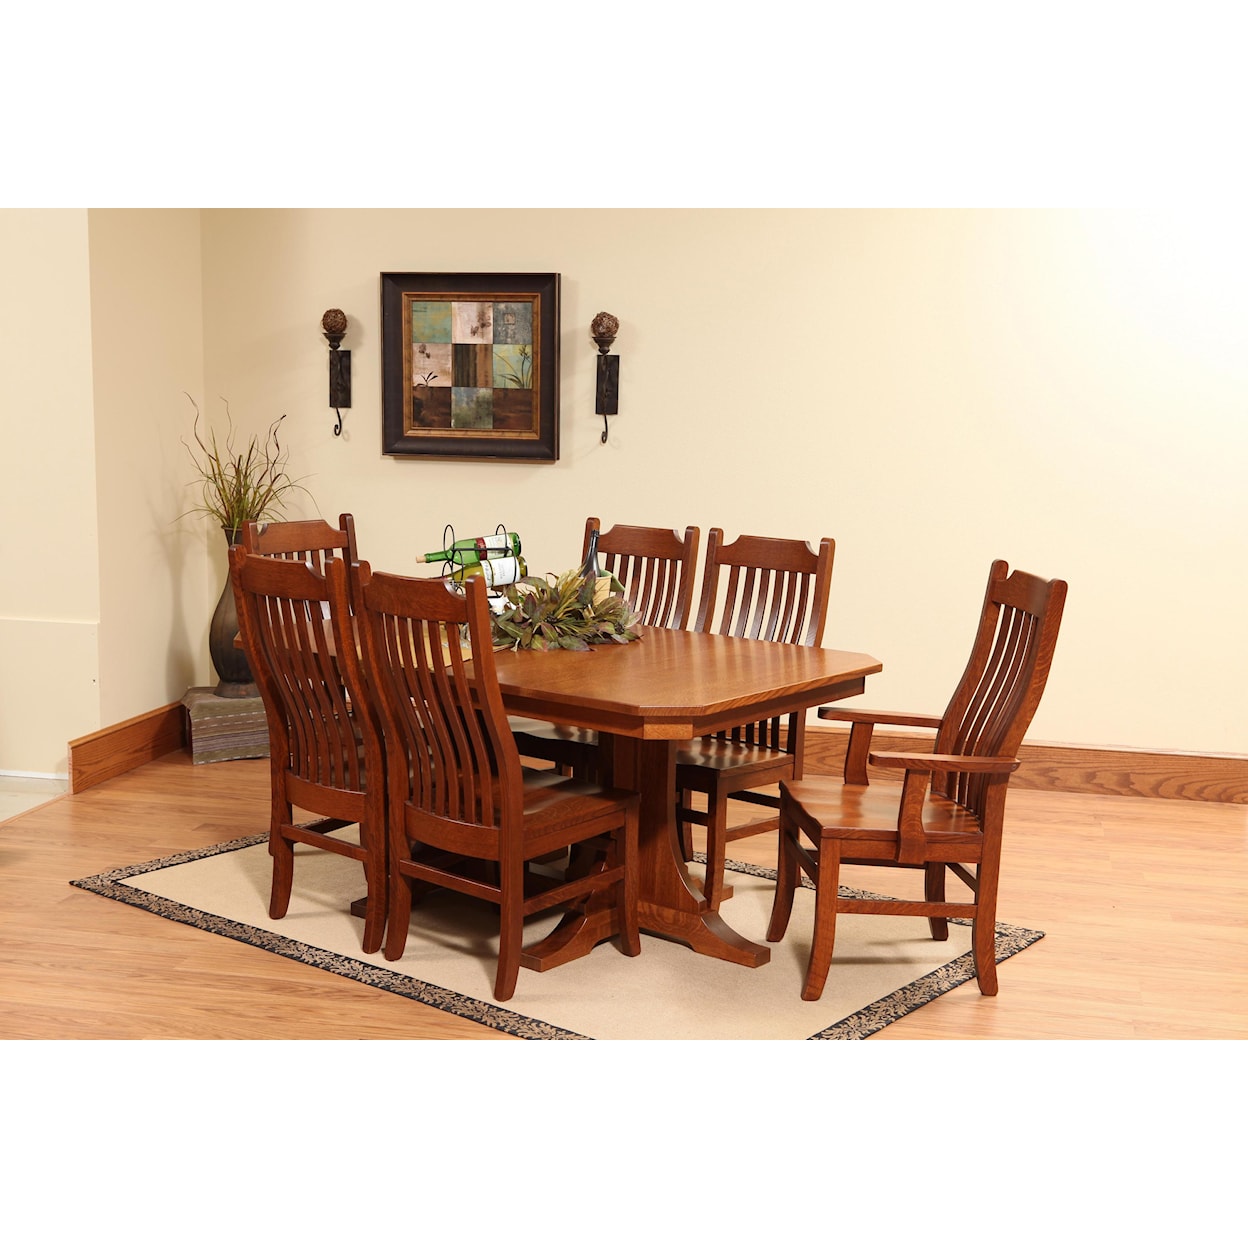 Amish Dining Room Copper Canyon 7 Piece Set